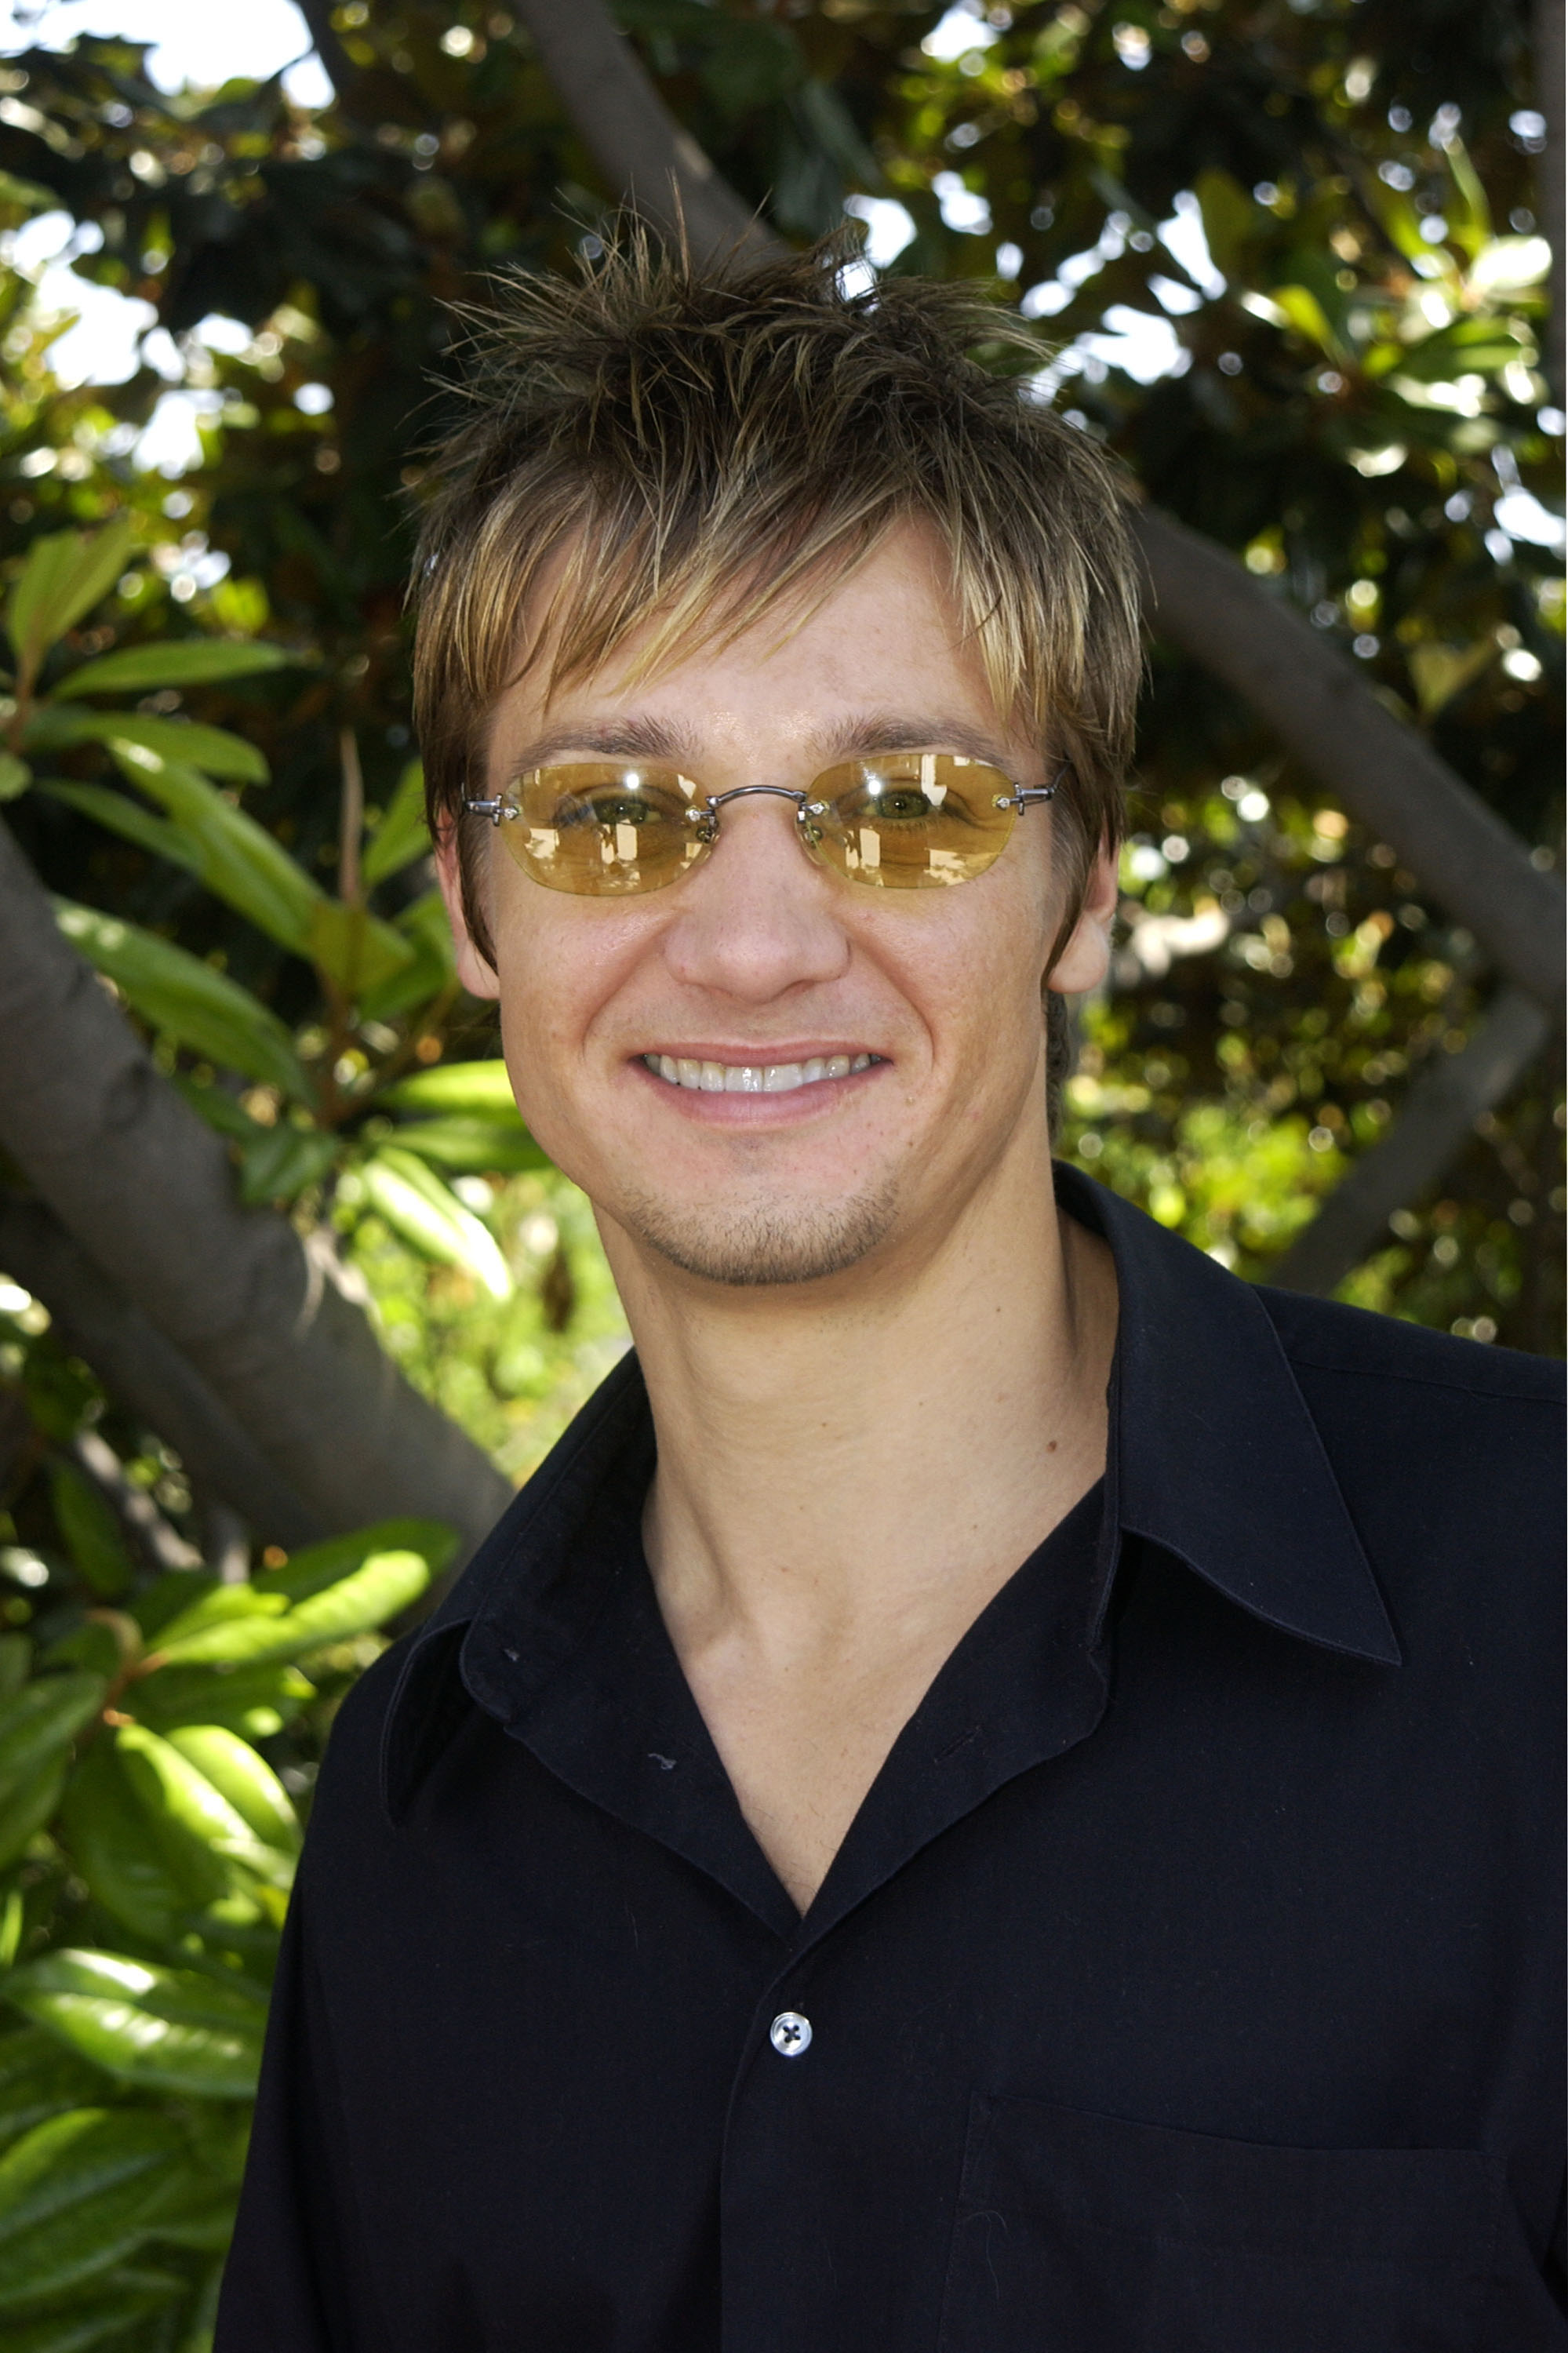 Jeremy Renner Promotional Photoshoot For Dahmer Press Conference 021 Usa 02 08 31 Jeremy Renner Daily ジェレミー レナー通信